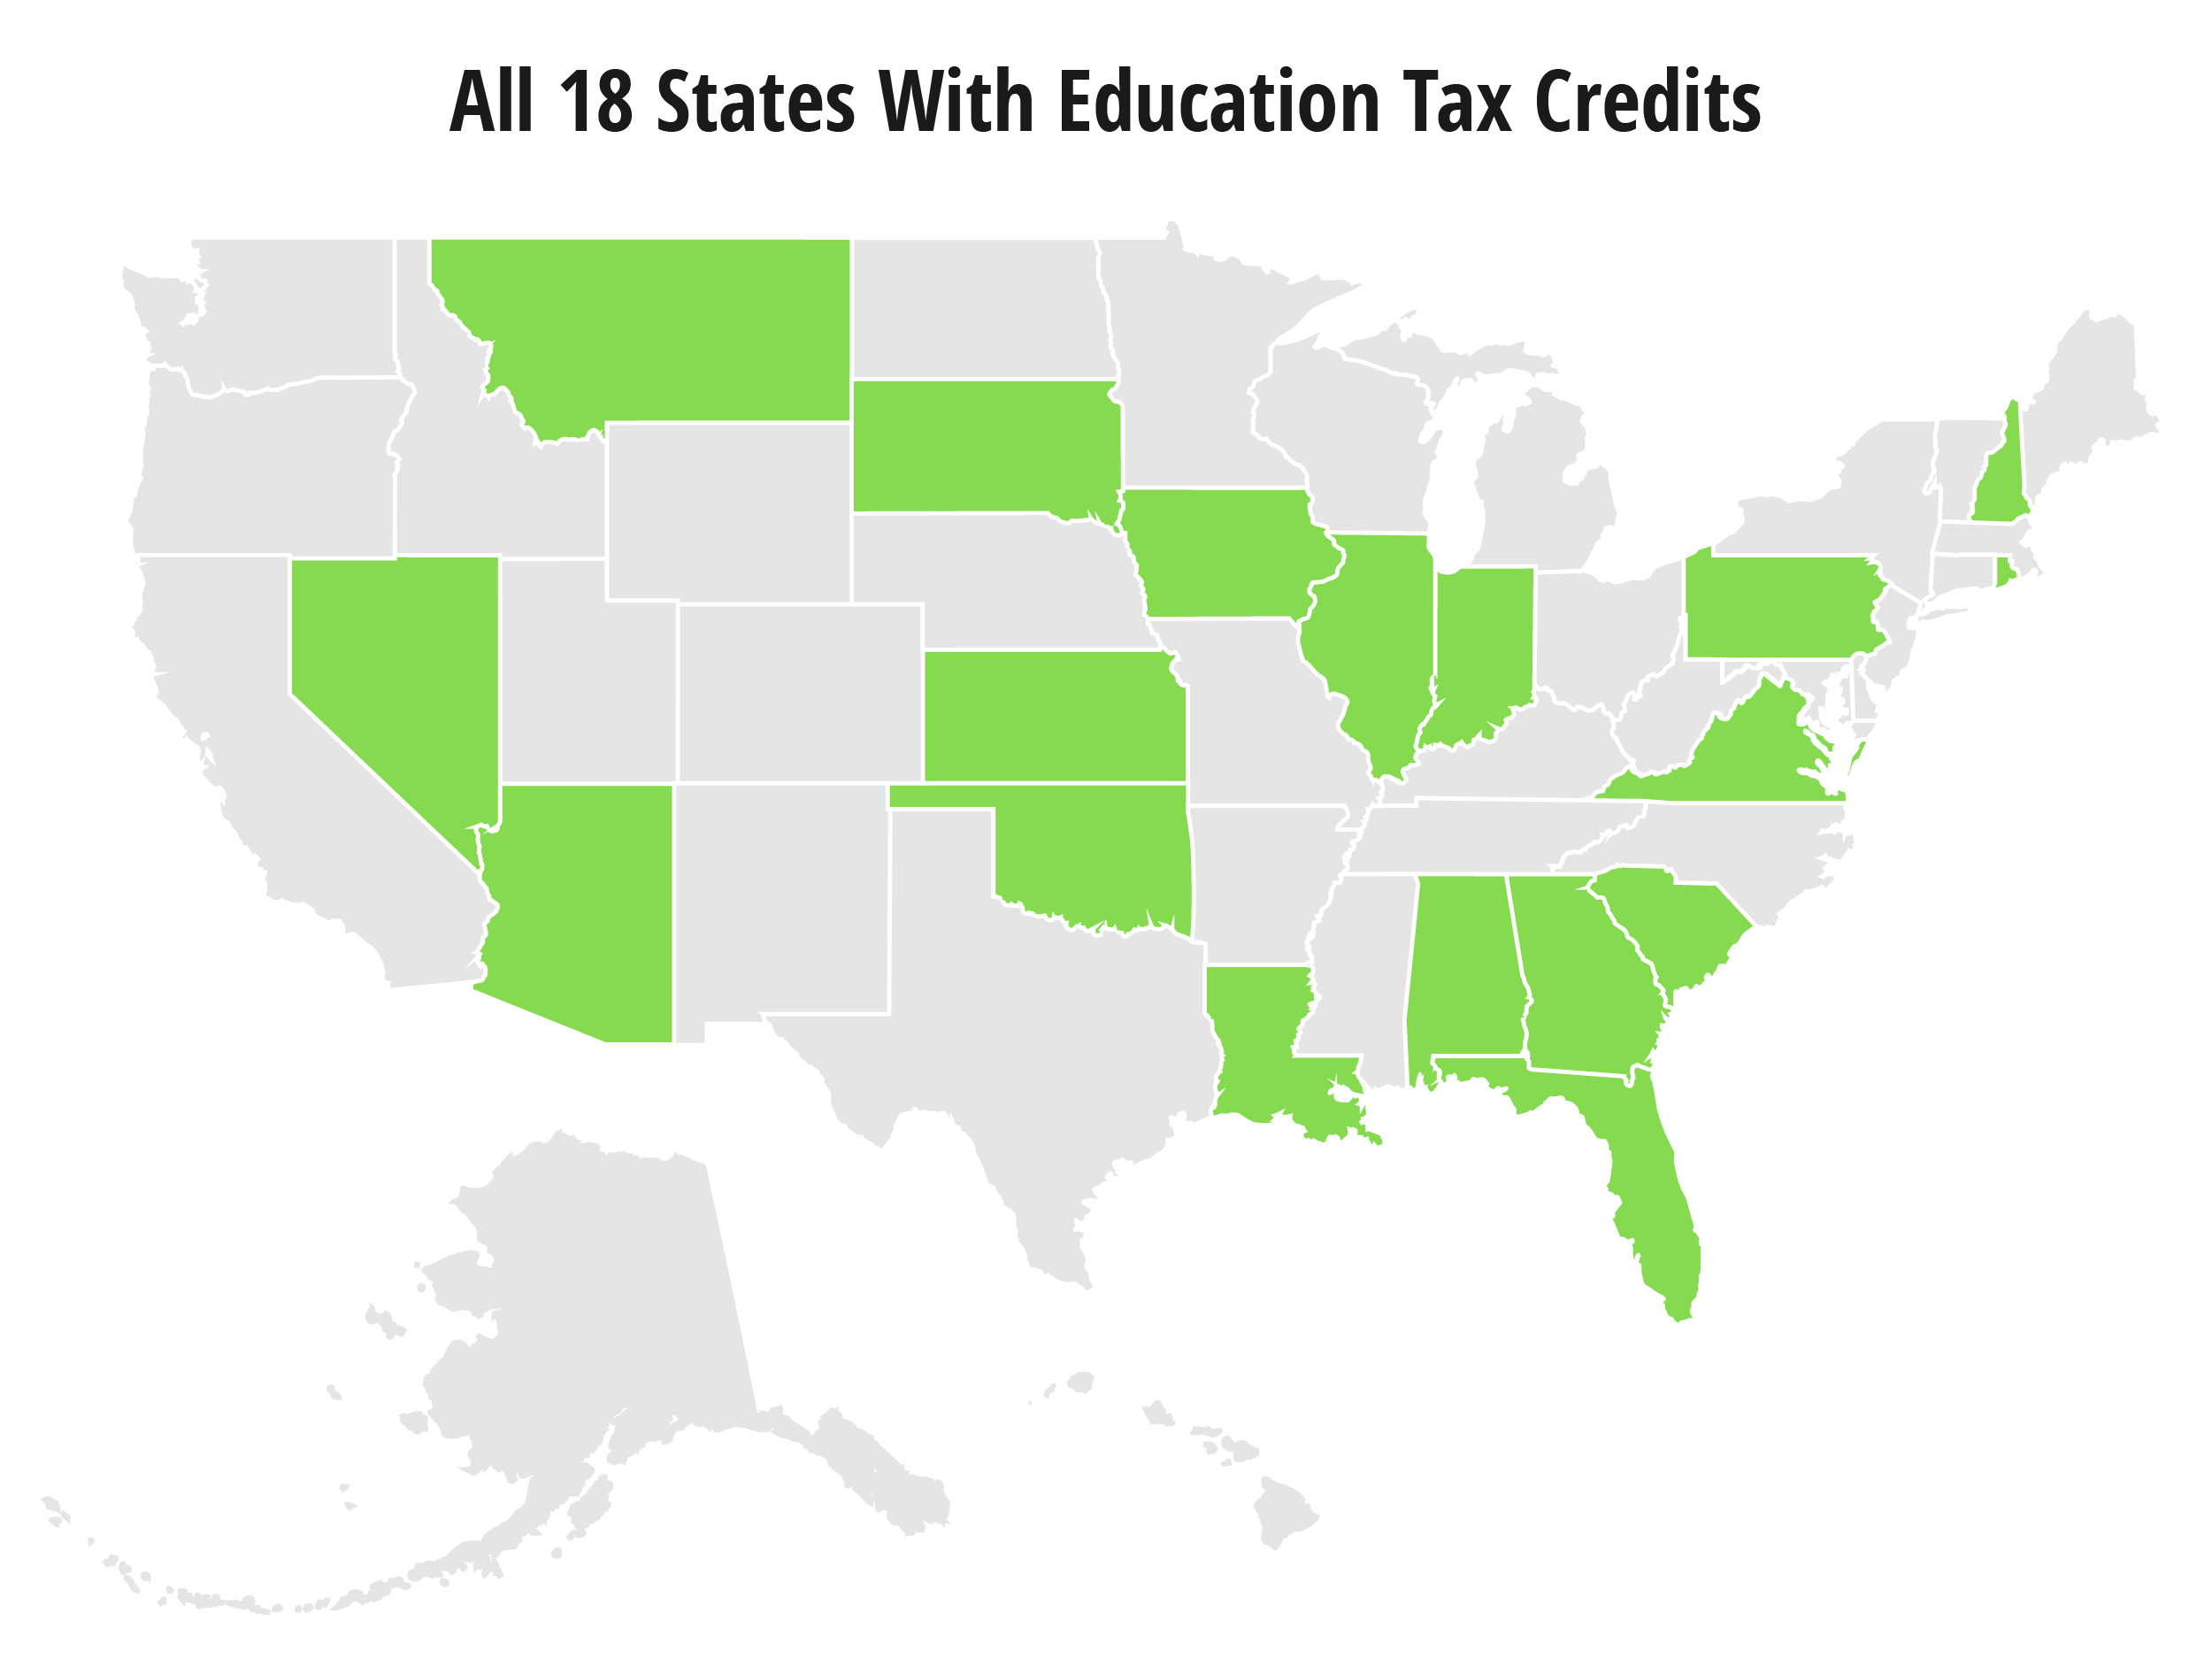 States with Tax Credits